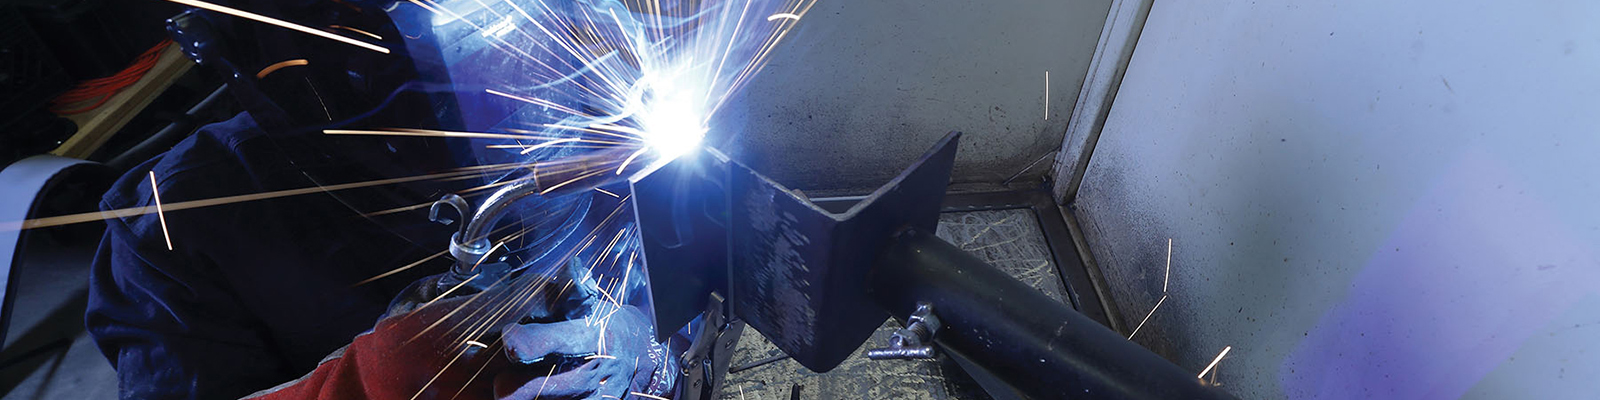 Side view of a Southeast Tech student in welding gloves and mask using a torch on a weld